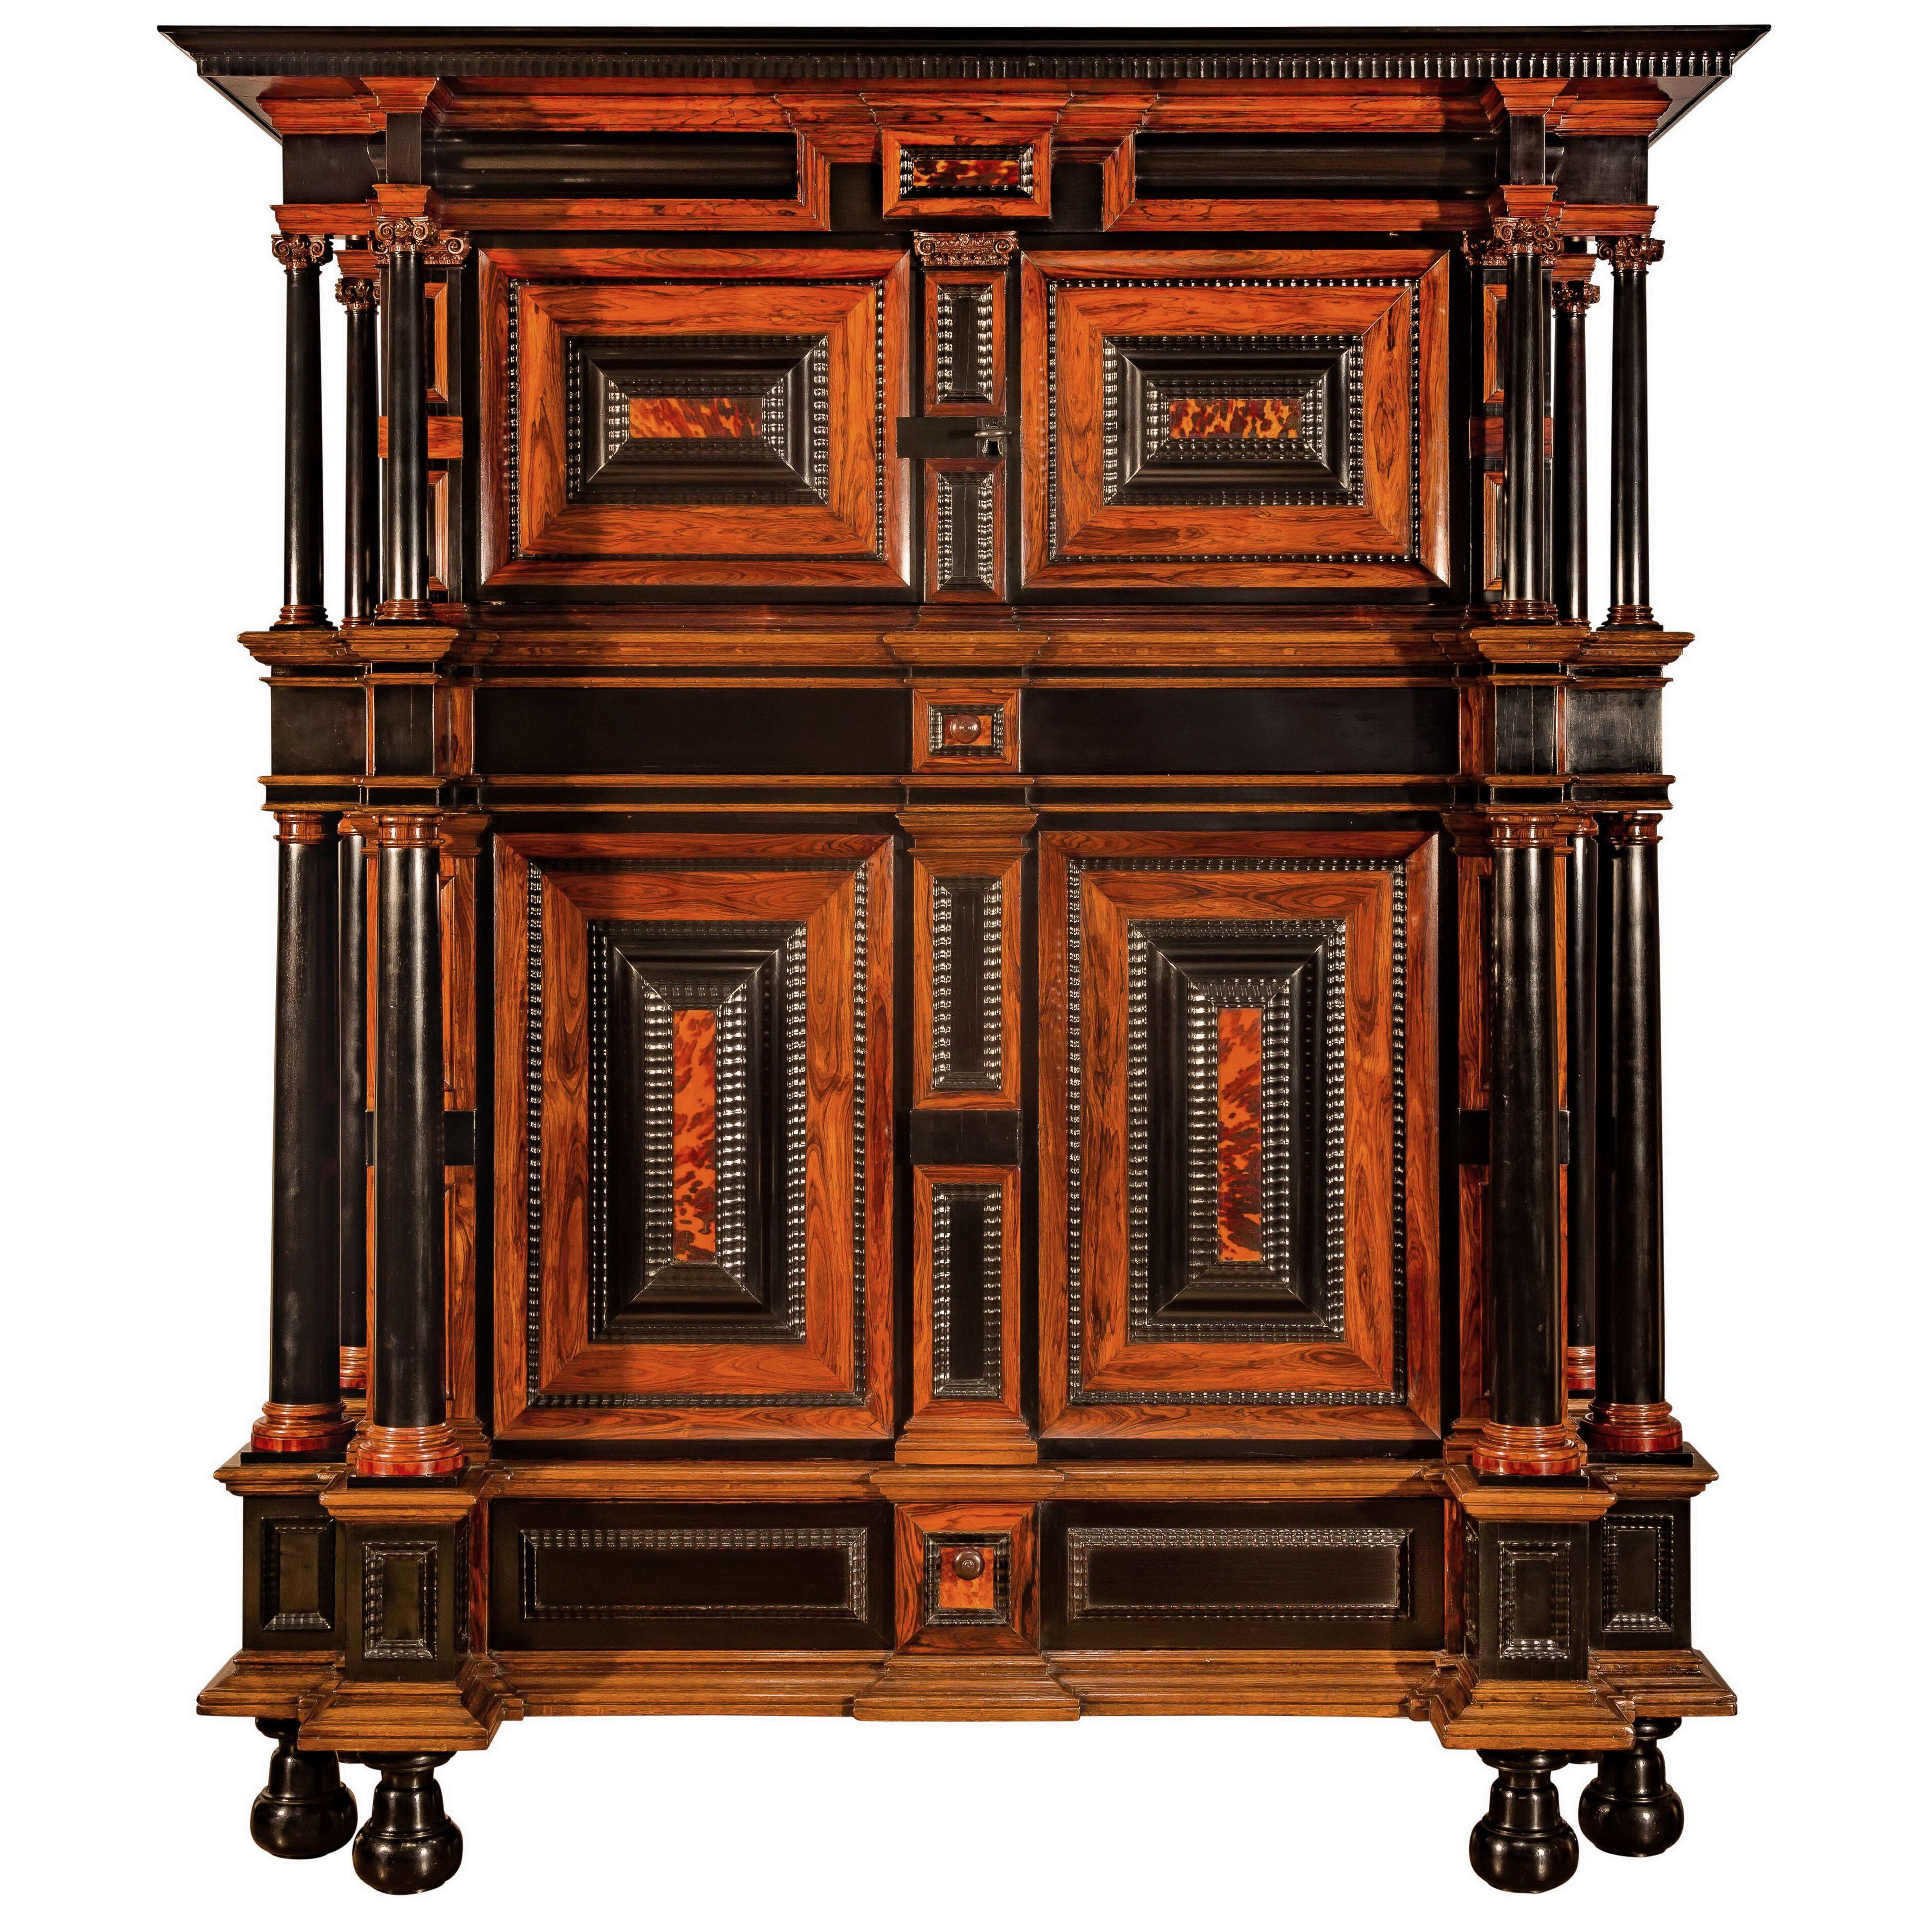 An early Dutch cupboard attributed to Herman Doomer